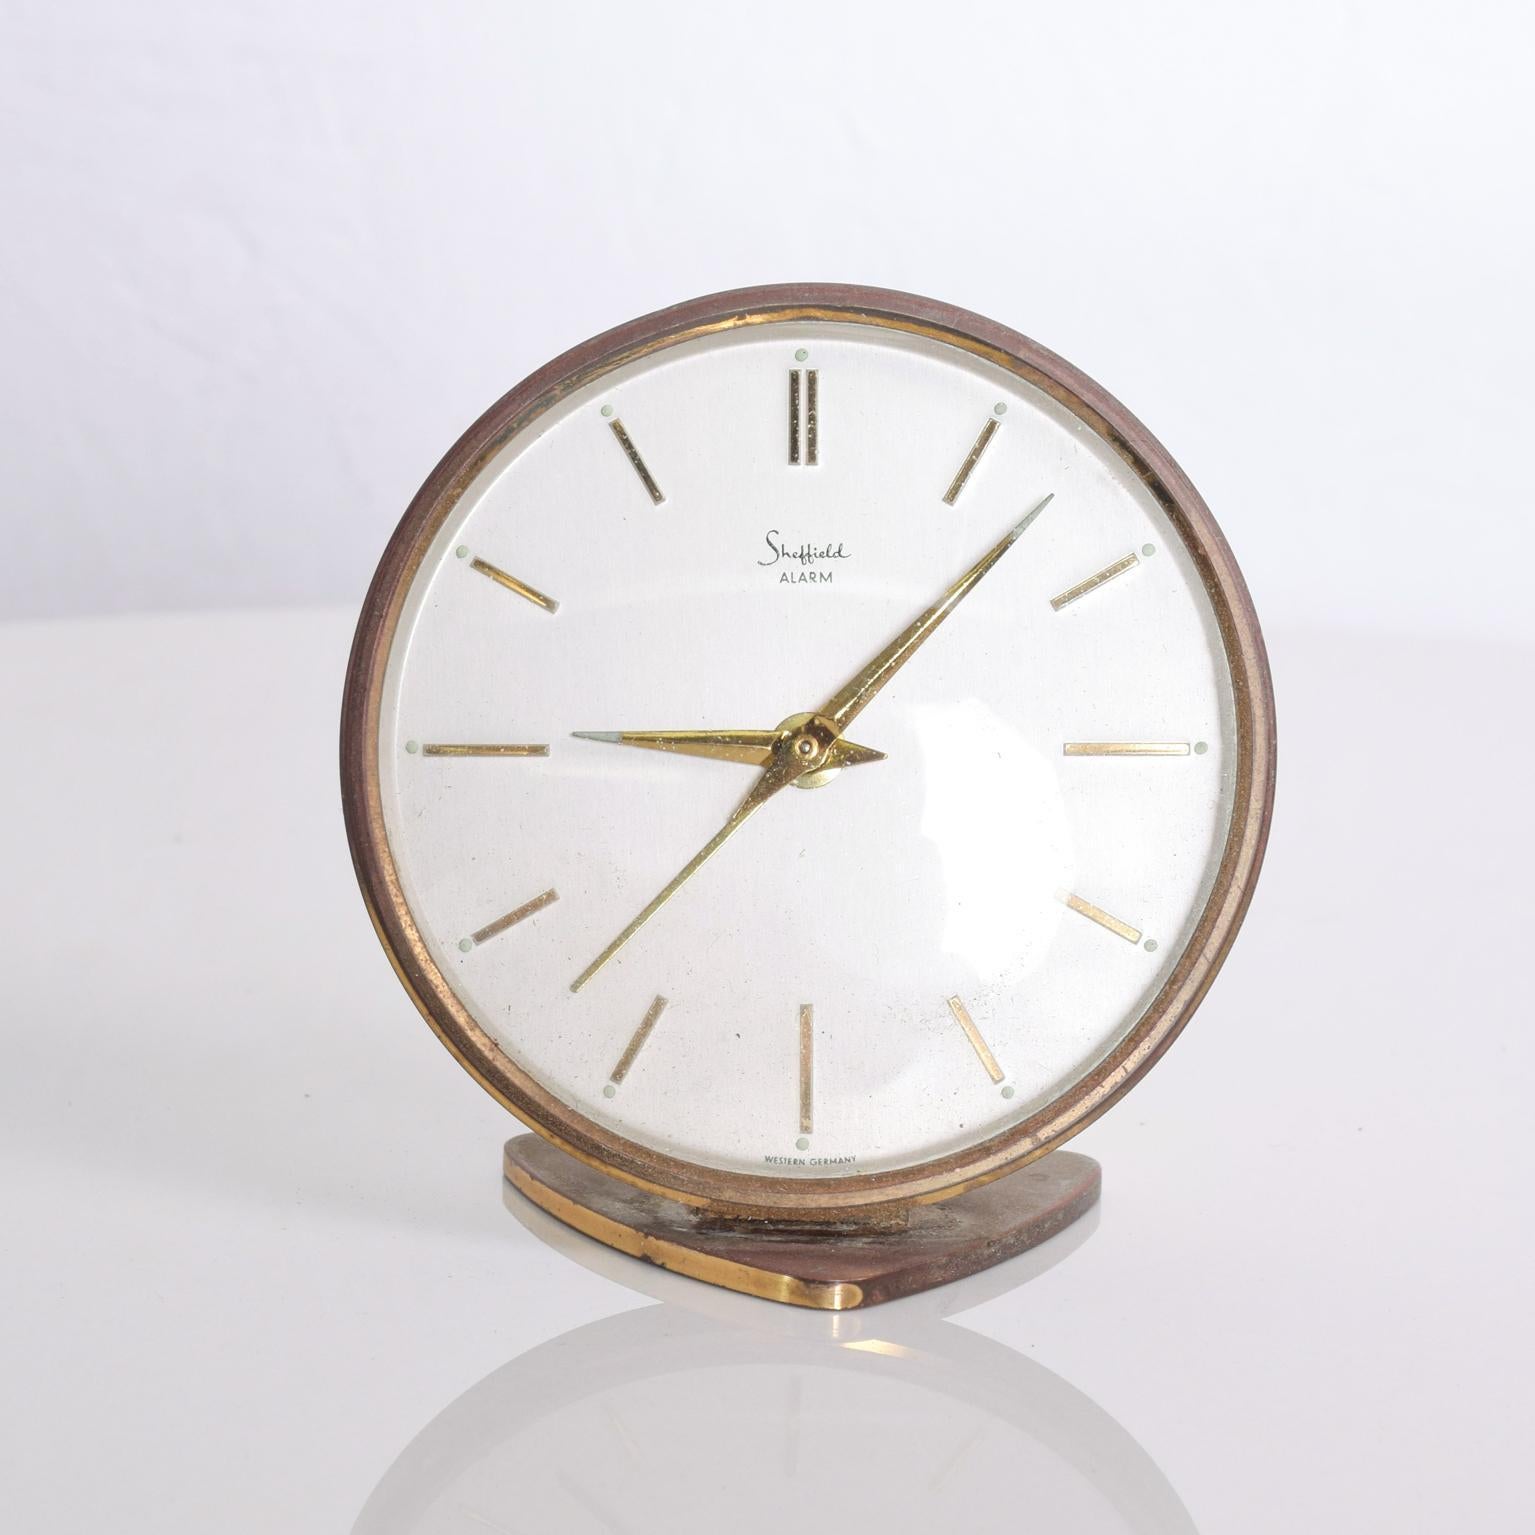 We are pleased to offer for your consideration a vintage clock by Sheffield West Germany. 

Brass body.

Dimensions: 3 1/2